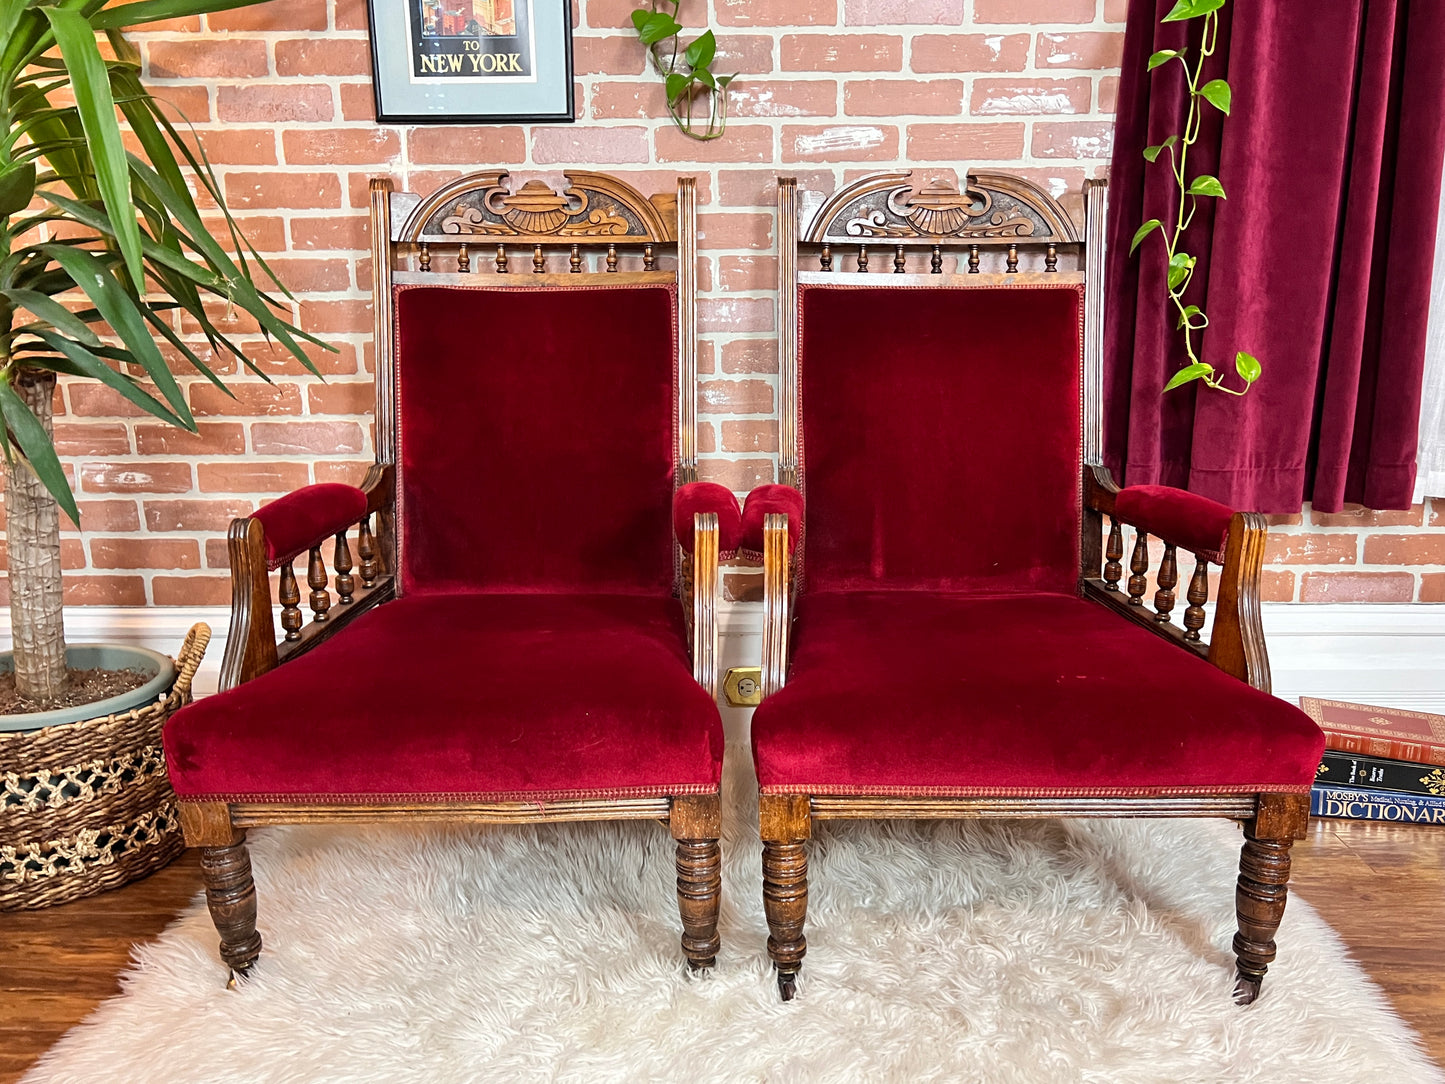 The Royal Cherry Chairs